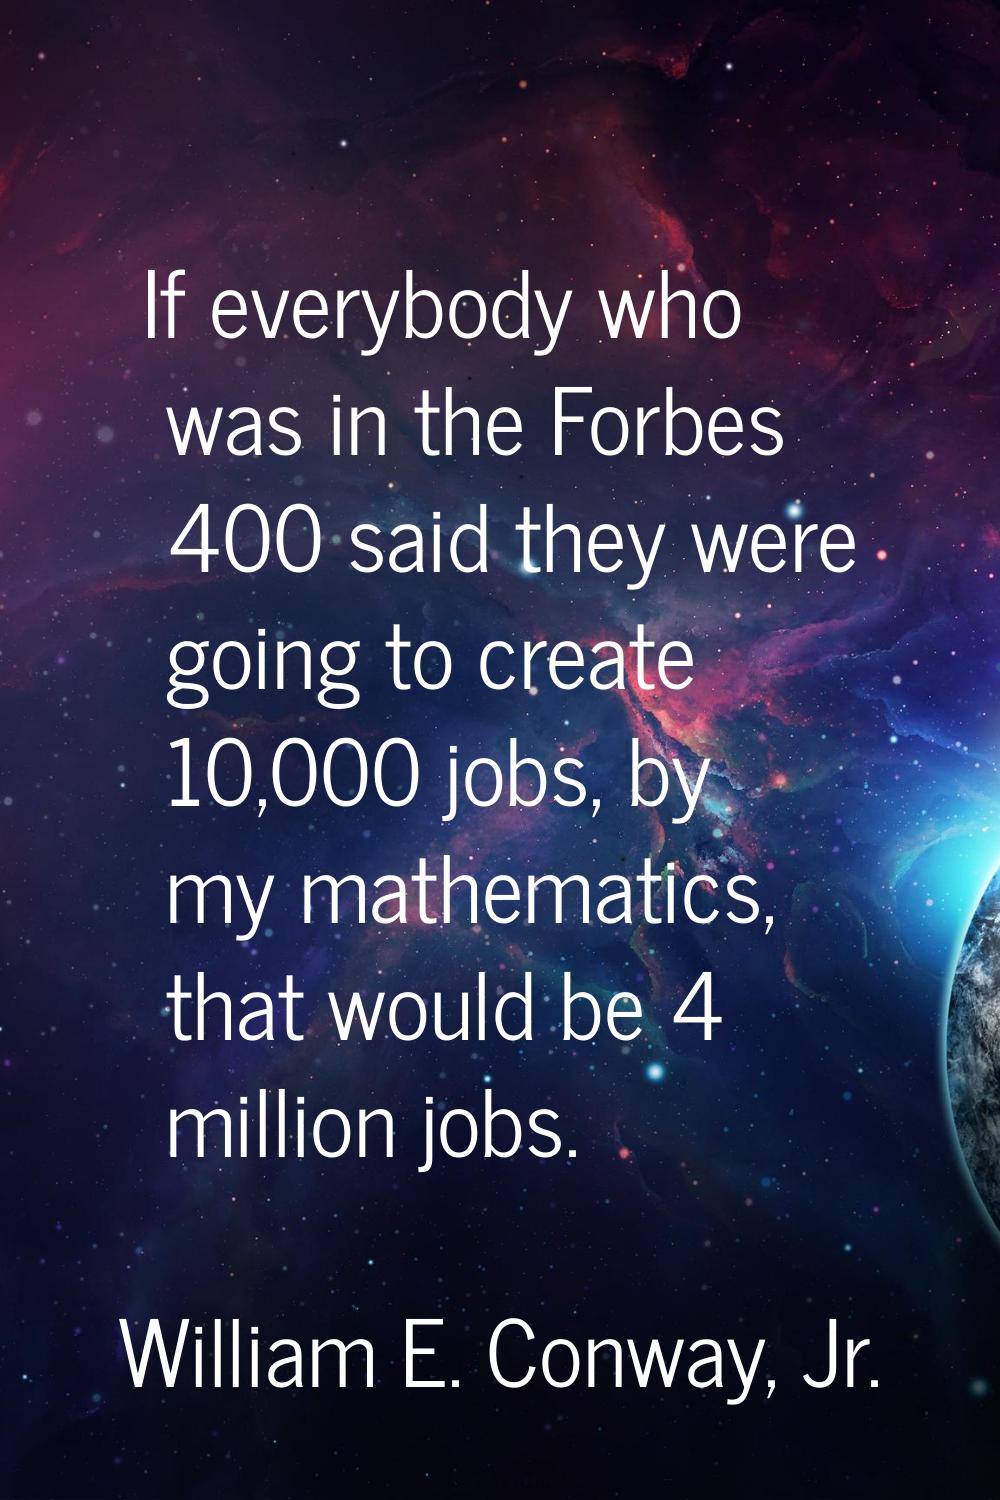 If everybody who was in the Forbes 400 said they were going to create 10,000 jobs, by my mathematic